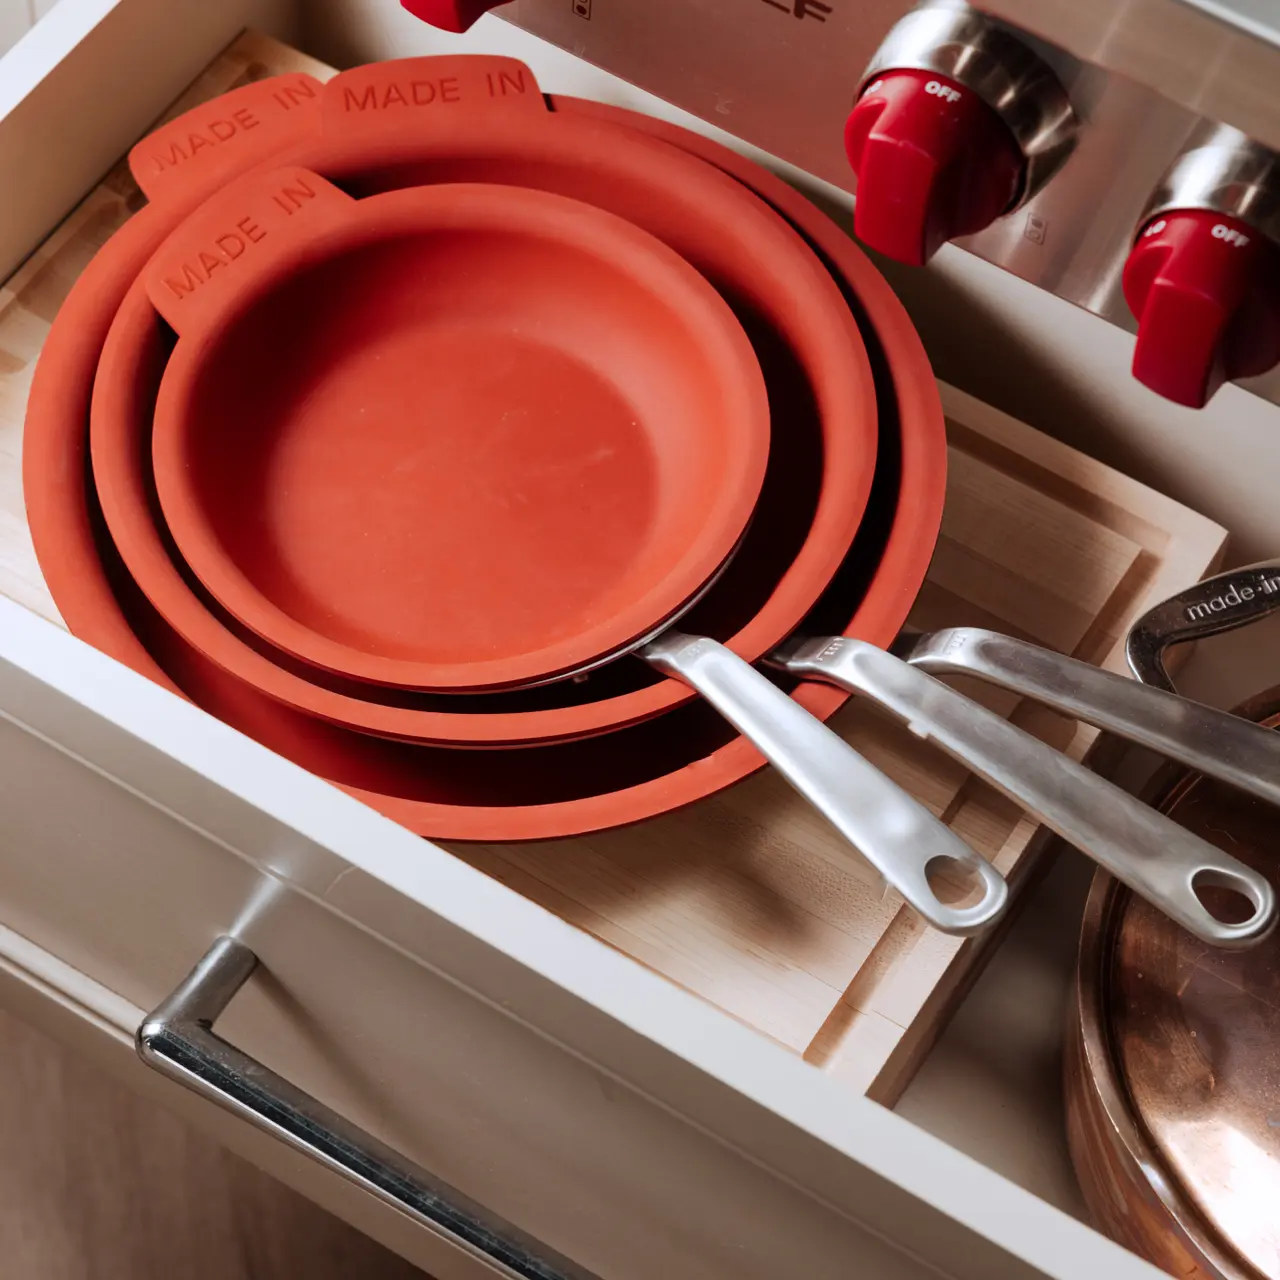 A set of red-orange pans is neatly stacked in an organized kitchen drawer beside a stainless steel pot with red knobs.